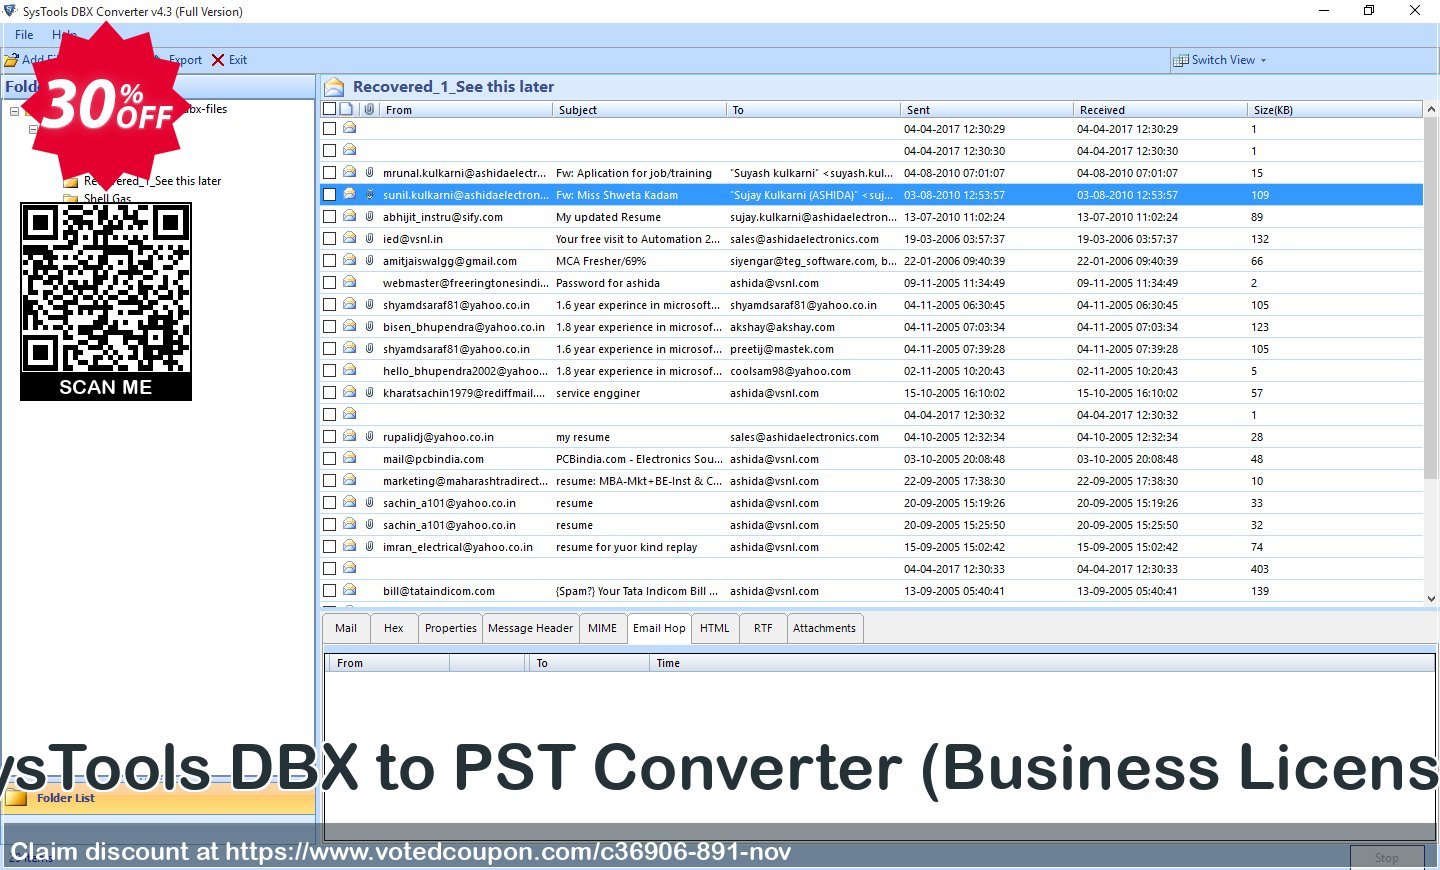 SysTools DBX to PST Converter, Business Plan  Coupon, discount SysTools coupon 36906. Promotion: SysTools promotion codes 36906